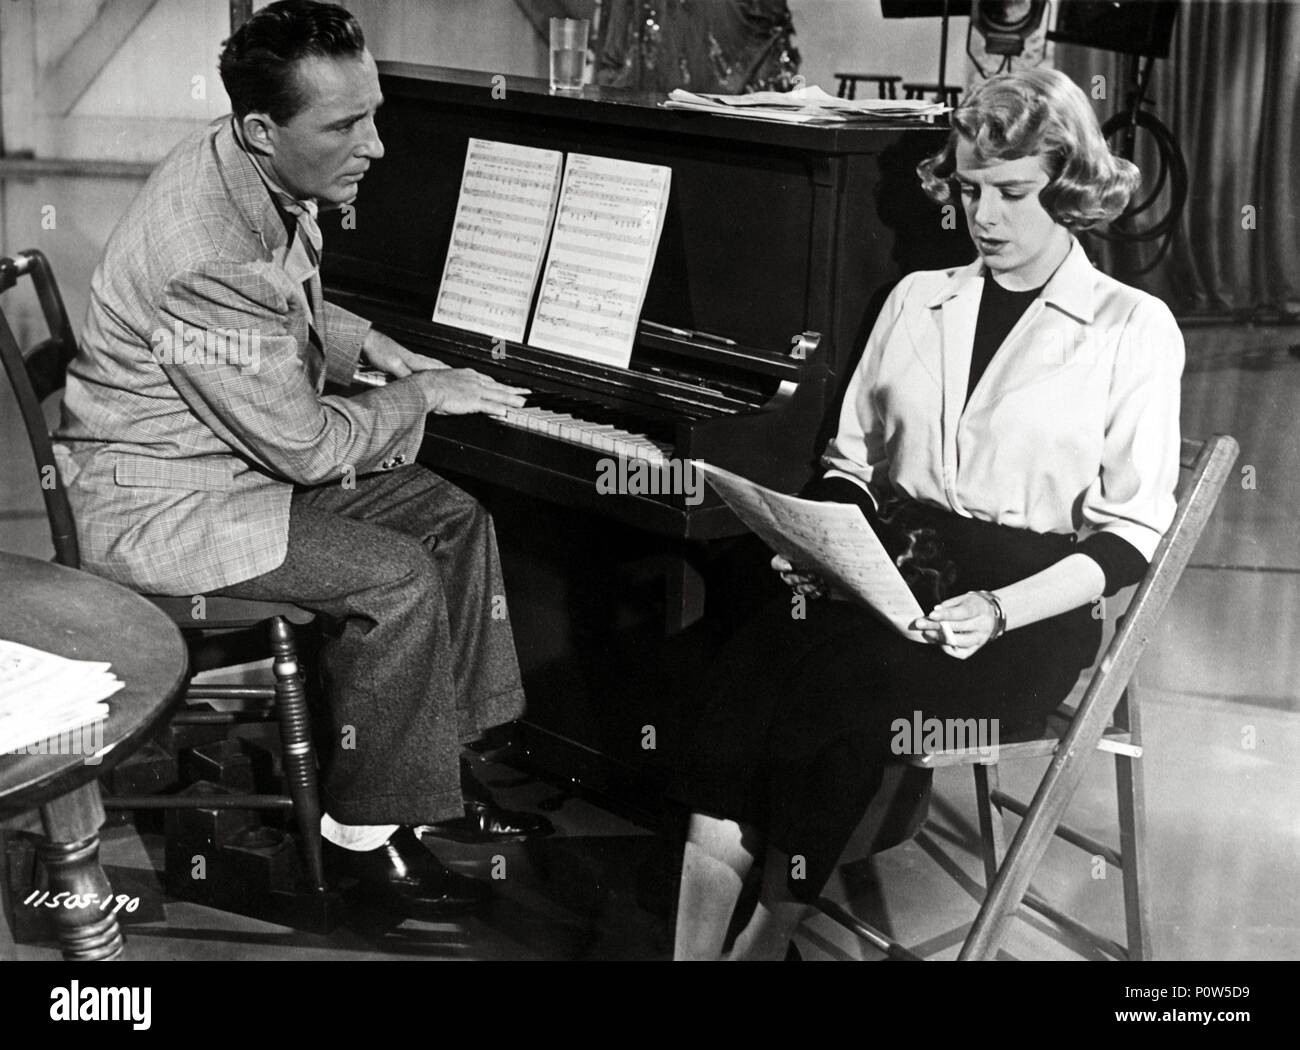 Original Film Title: WHITE CHRISTMAS.  English Title: WHITE CHRISTMAS.  Film Director: MICHAEL CURTIZ.  Year: 1954.  Stars: BING CROSBY; ROSEMARY CLOONEY. Credit: PARAMOUNT PICTURES / Album Stock Photo